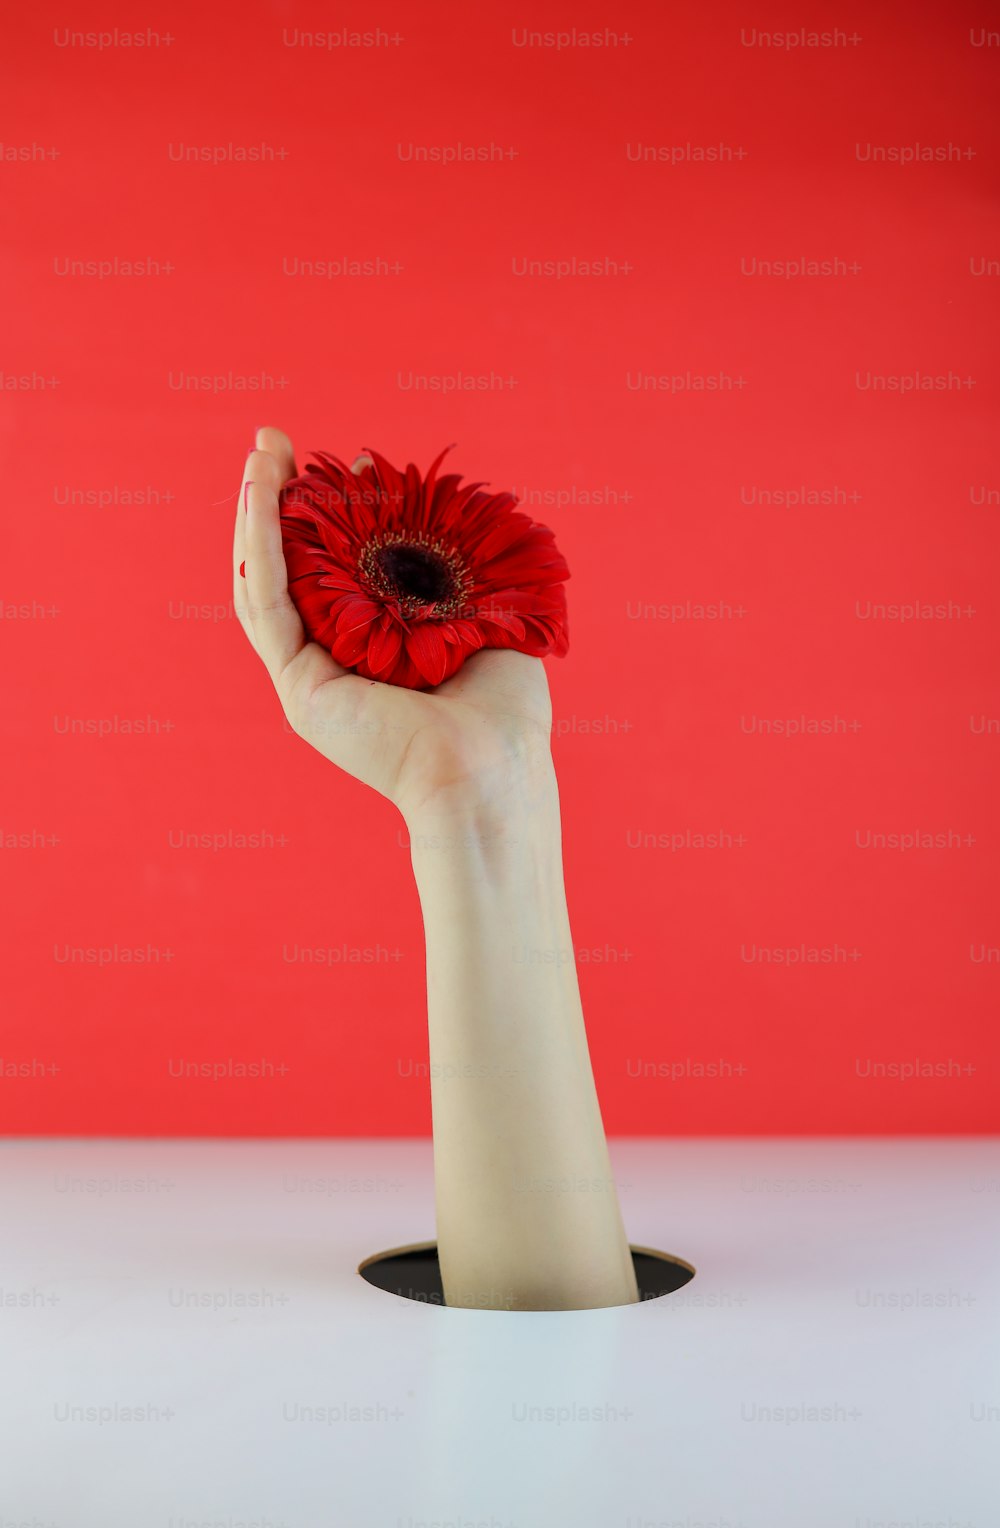 a person's hand holding a red flower in front of a red background